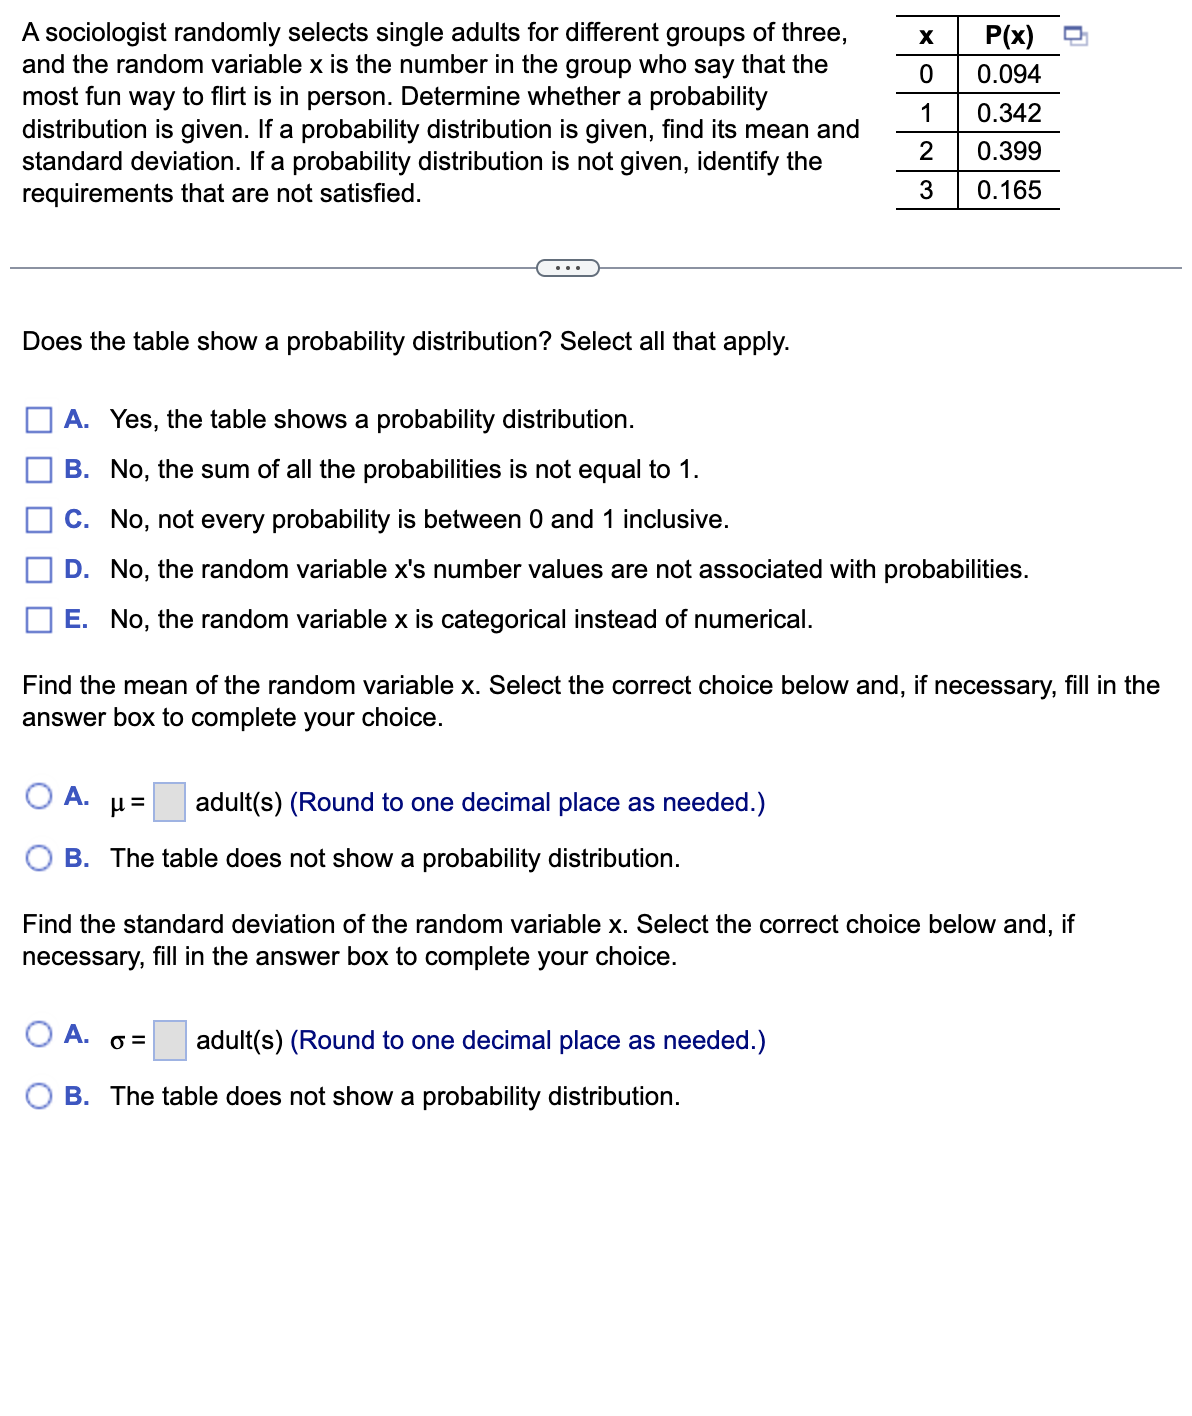 A sociologist randomly selects single adults for different groups of three,
and the random variable x is the number in the group who say that the
most fun way to flirt is in person. Determine whether a probability
distribution is given. If a probability distribution is given, find its mean and
standard deviation. If a probability distribution is not given, identify the
requirements that are not satisfied.
Does the table show a probability distribution? Select all that apply.
A. Yes, the table shows a probability distribution.
B. No, the sum of all the probabilities is not equal to 1.
C. No, not every probability is between 0 and 1 inclusive.
D. No, the random variable x's number values are not associated with probabilities.
E. No, the random variable x is categorical instead of numerical.
A.
Find the mean of the random variable x. Select the correct choice below and, if necessary, fill in the
answer box to complete your choice.
= 1/
adult(s) (Round to one decimal place as needed.)
B. The table does not show a probability distribution.
A.
X
0
1
2
3
P(x)
0.094
0.342
0.399
0.165
Find the standard deviation of the random variable x. Select the correct choice below and, if
necessary, fill in the answer box to complete your choice.
O= adult(s) (Round to one decimal place as needed.)
B. The table does not show a probability distribution.